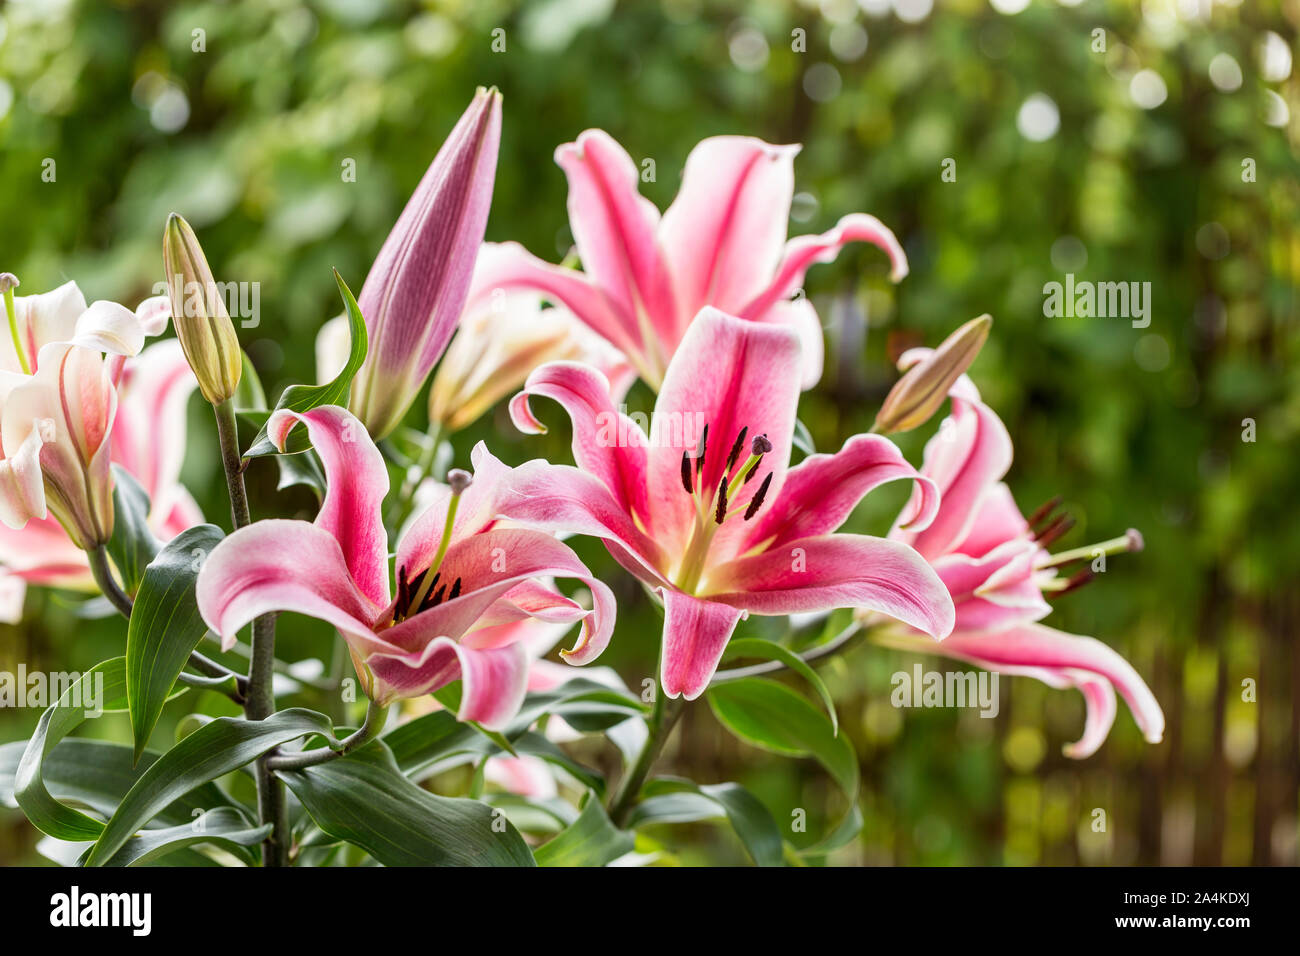 Bunch of bright pink lilies. Flourishing bright pink flowers. Stock Photo